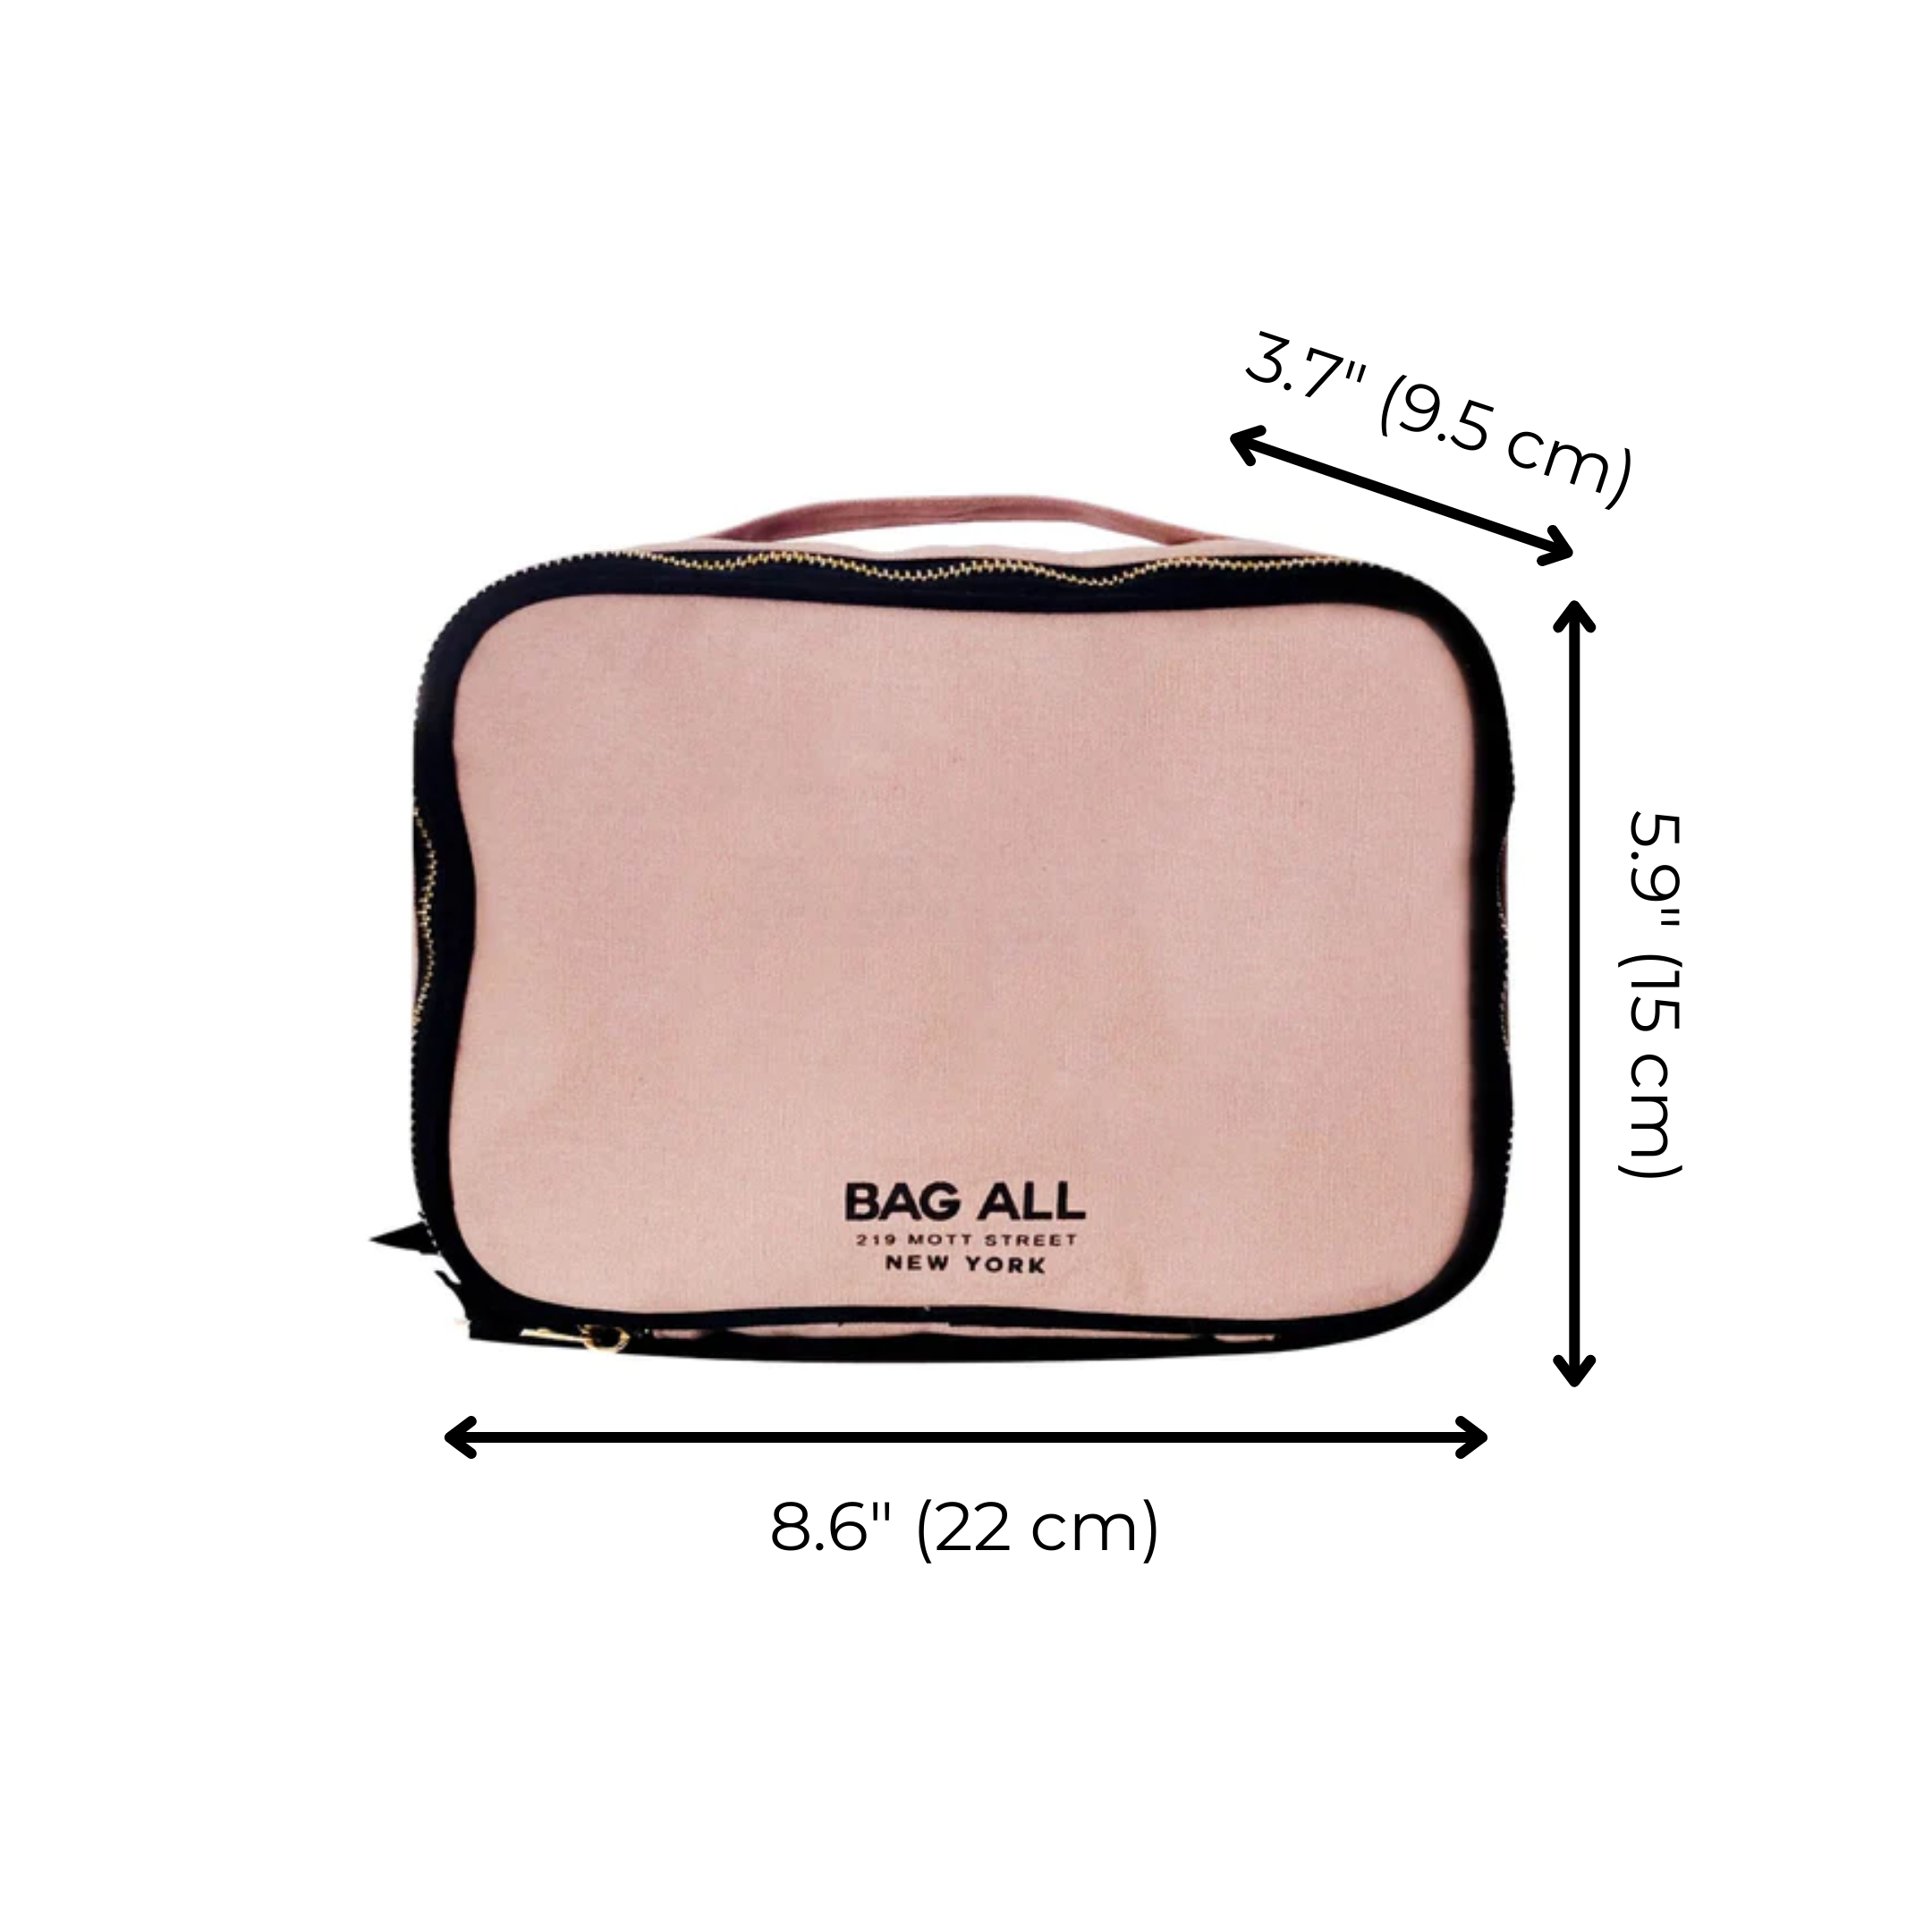 Double Sided Multi Use Case, Pink/Blush | Bag-all